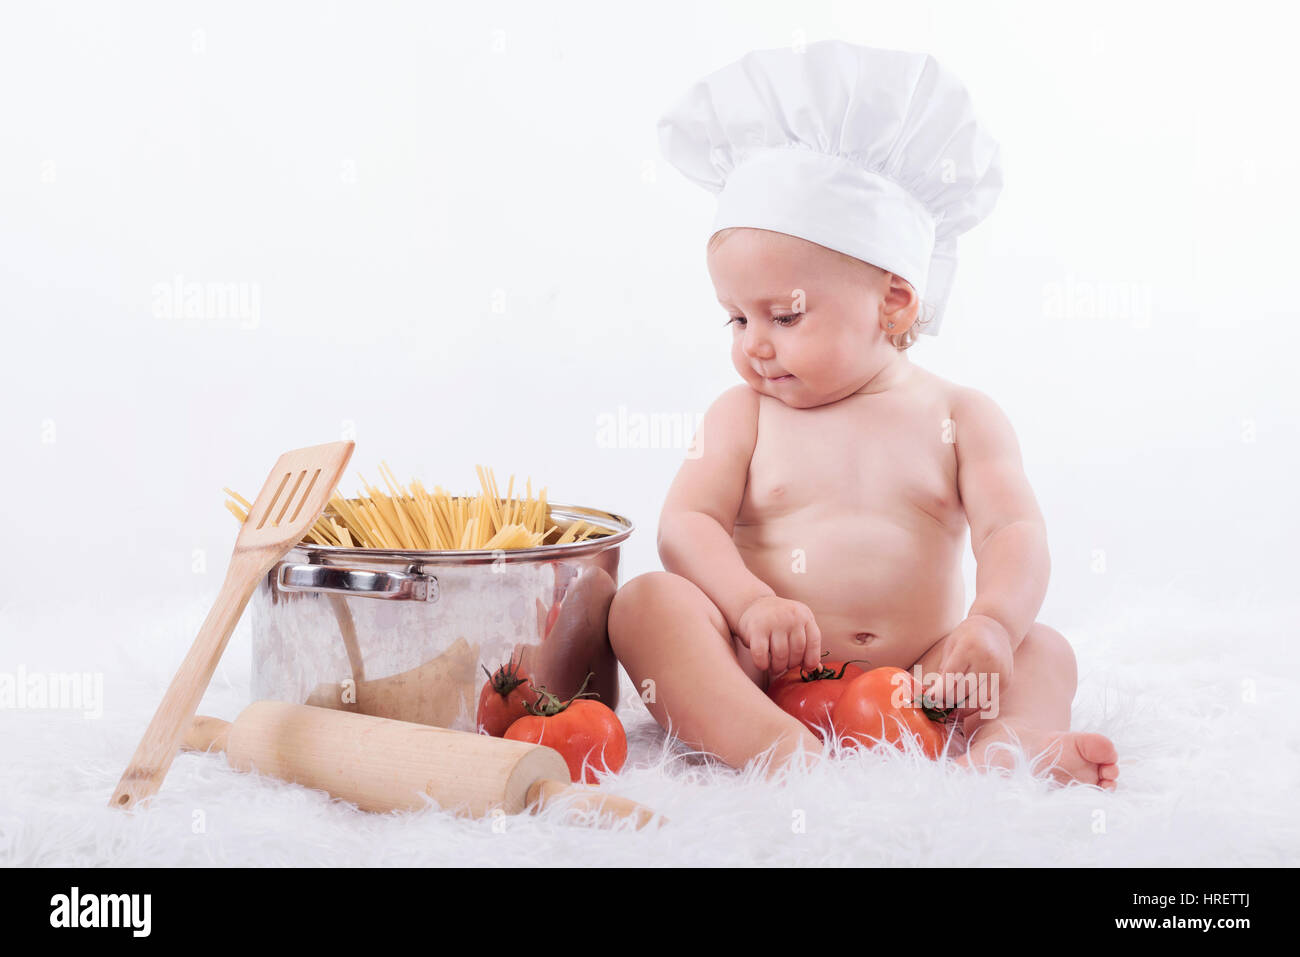 baby chef. Little baby in a chef's hat Stock Photo